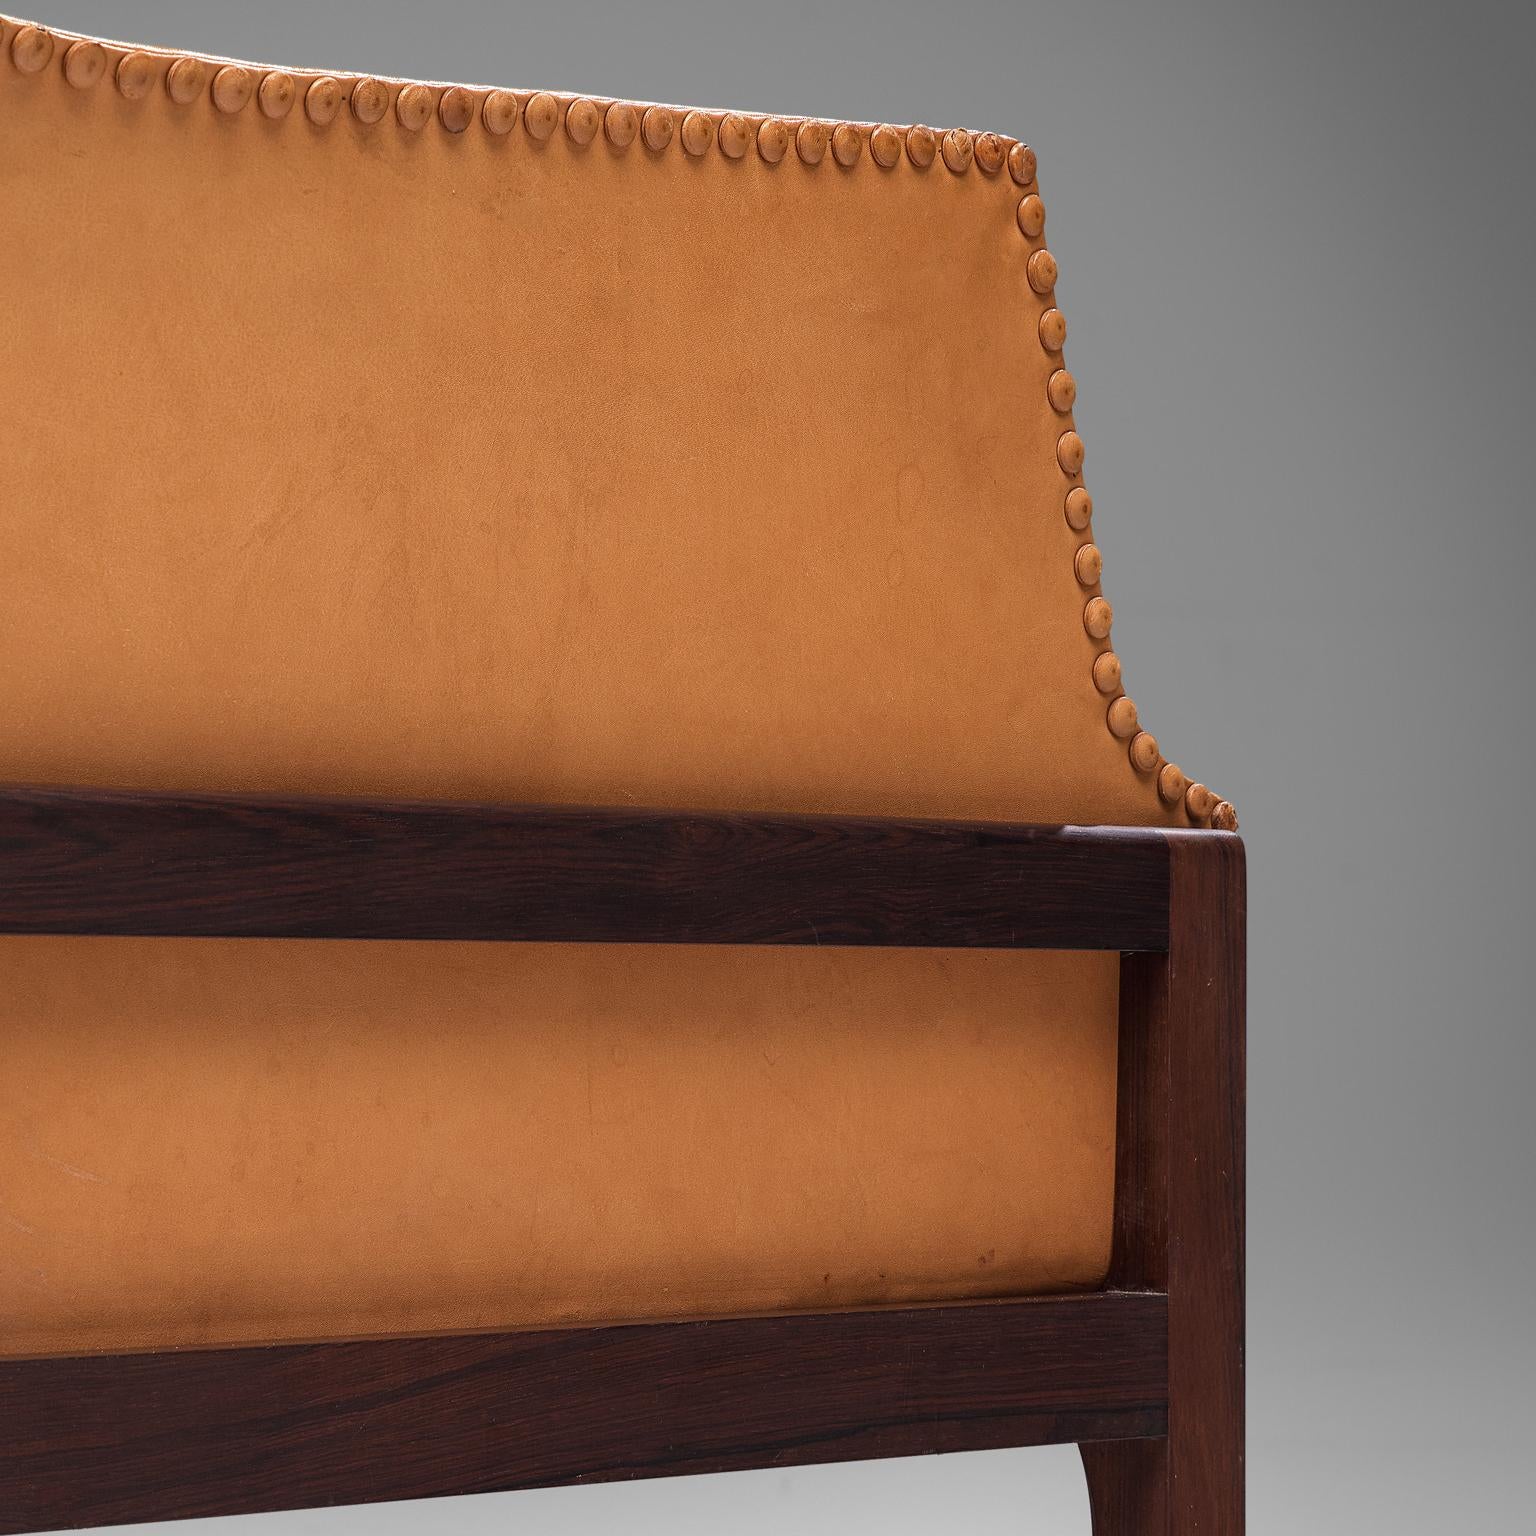 20th Century Mogens Koch Wingback Chair and Ottoman in Cognac Leather